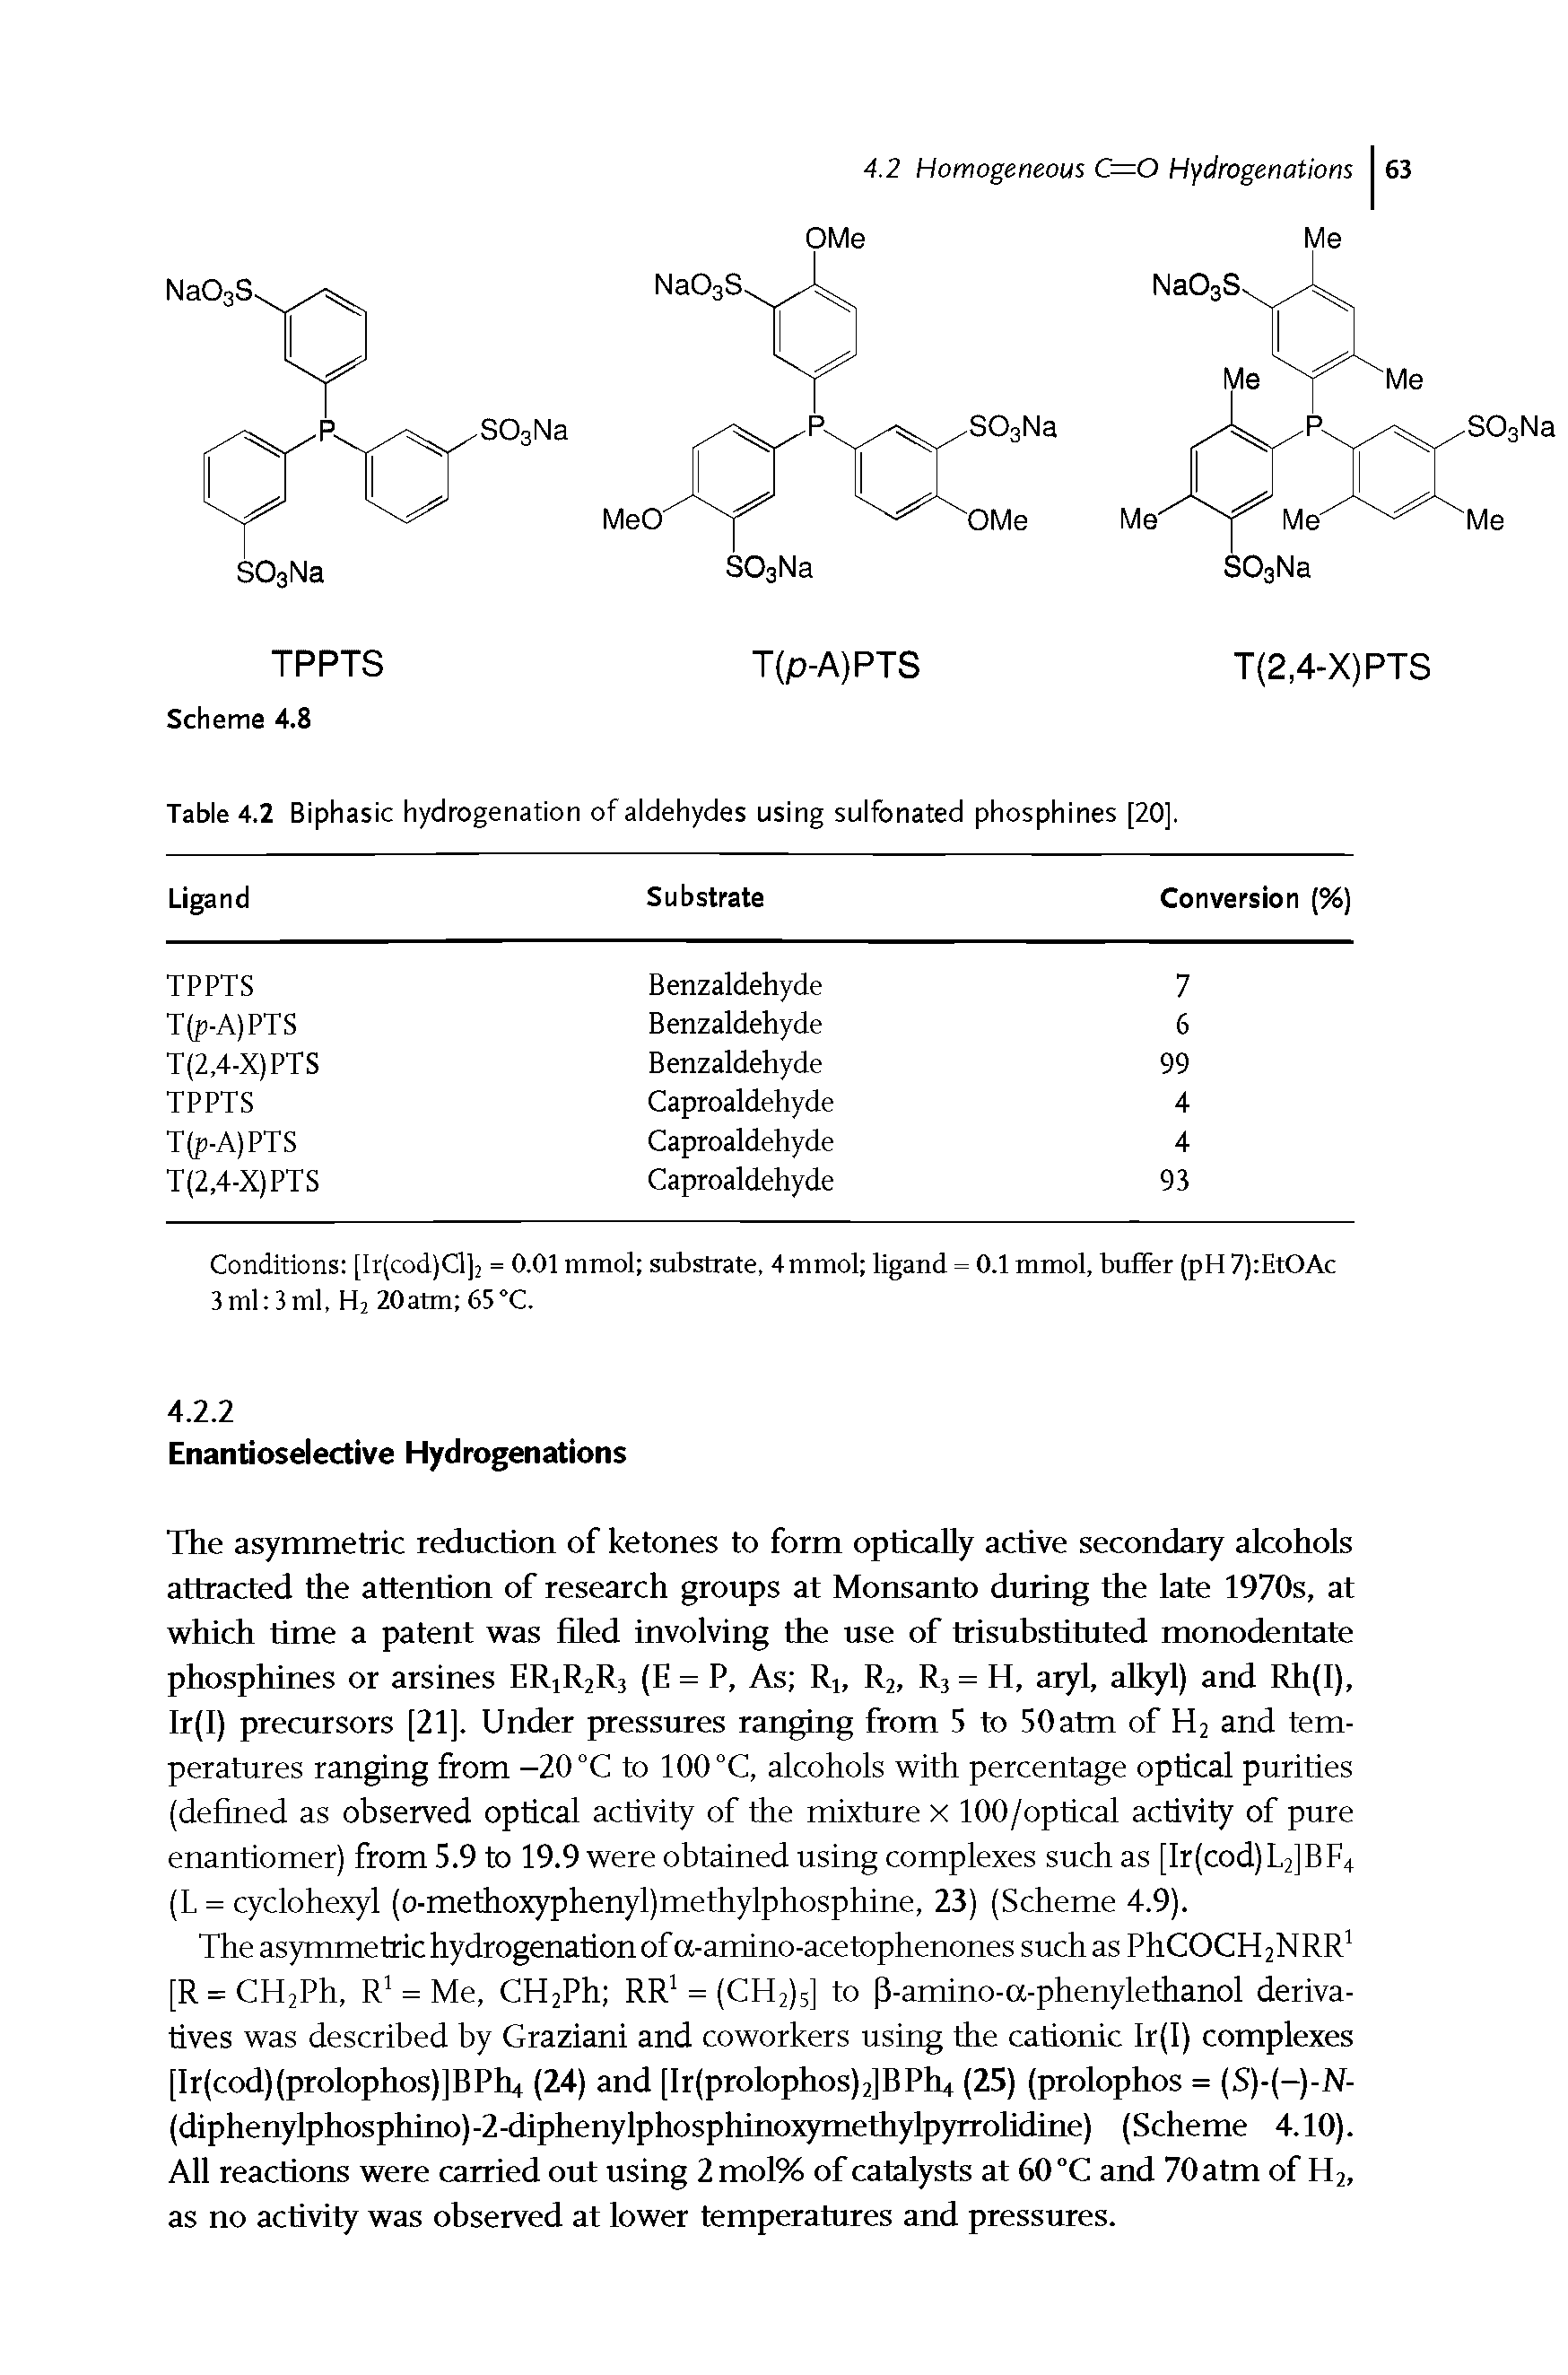 Table 4.2 Biphasic hydrogenation of aldehydes using sulfonated phosphines [20].